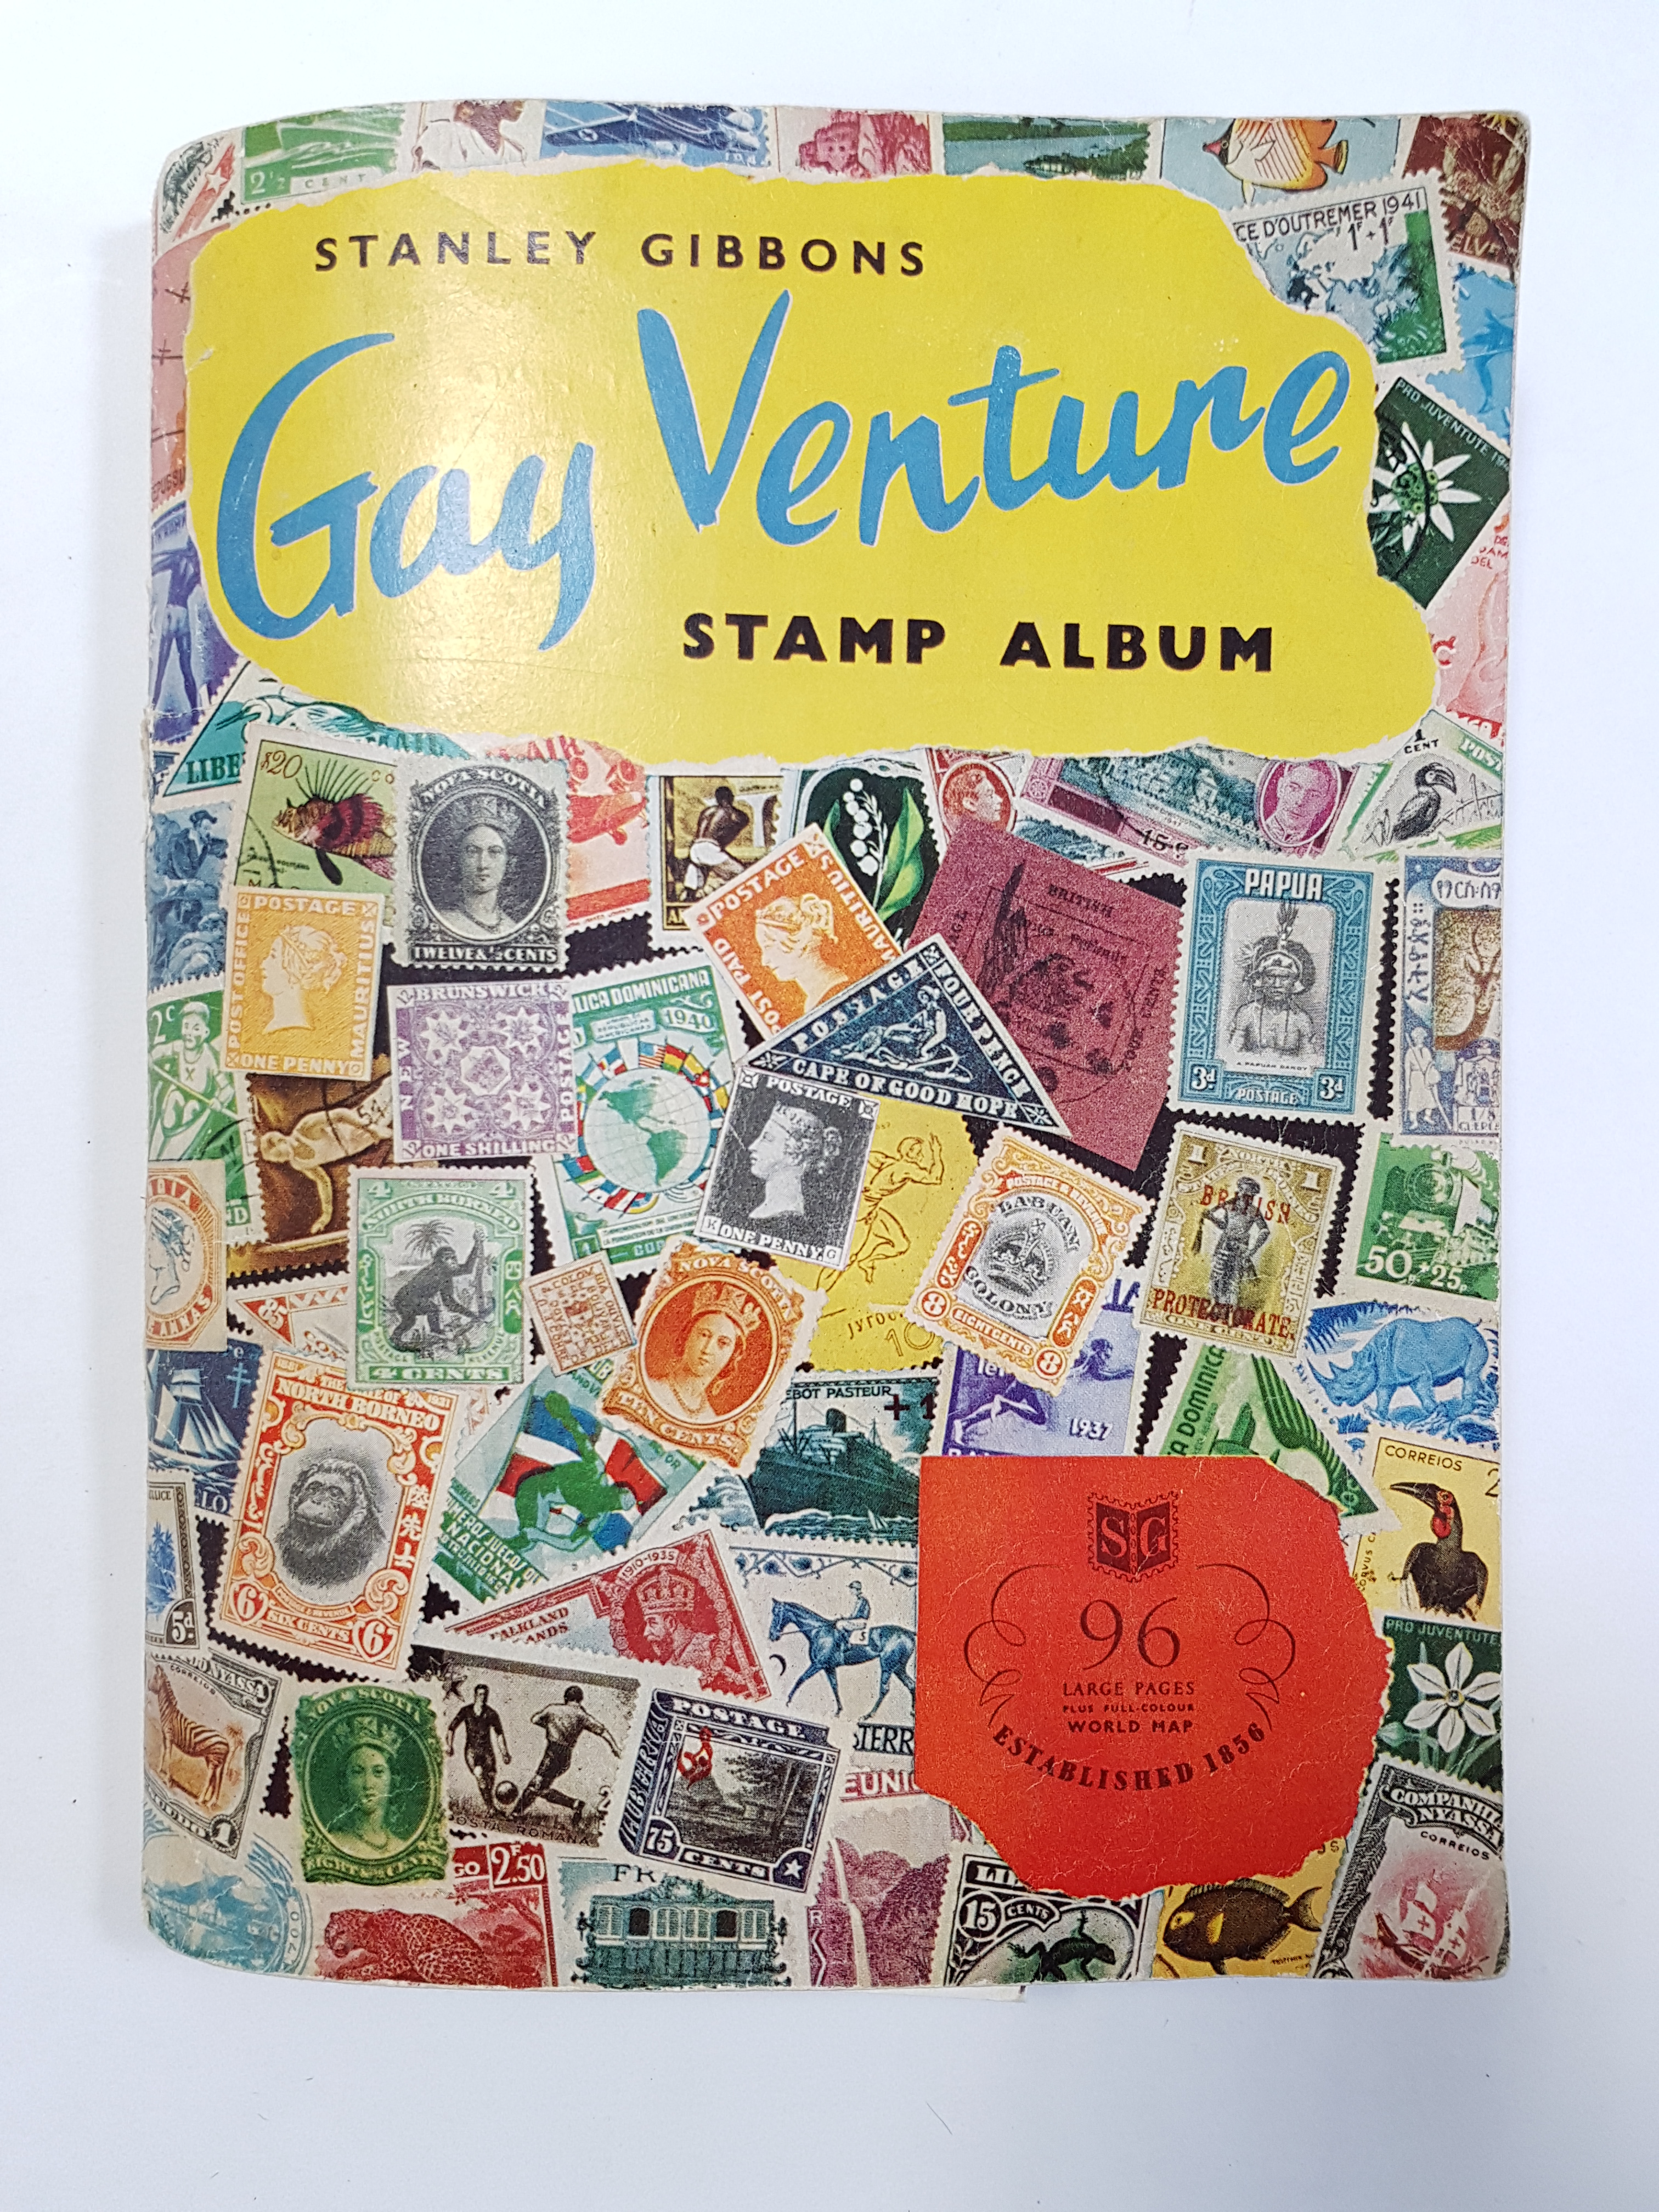 A Gay Venture stamp album & contents, various covers, etc.